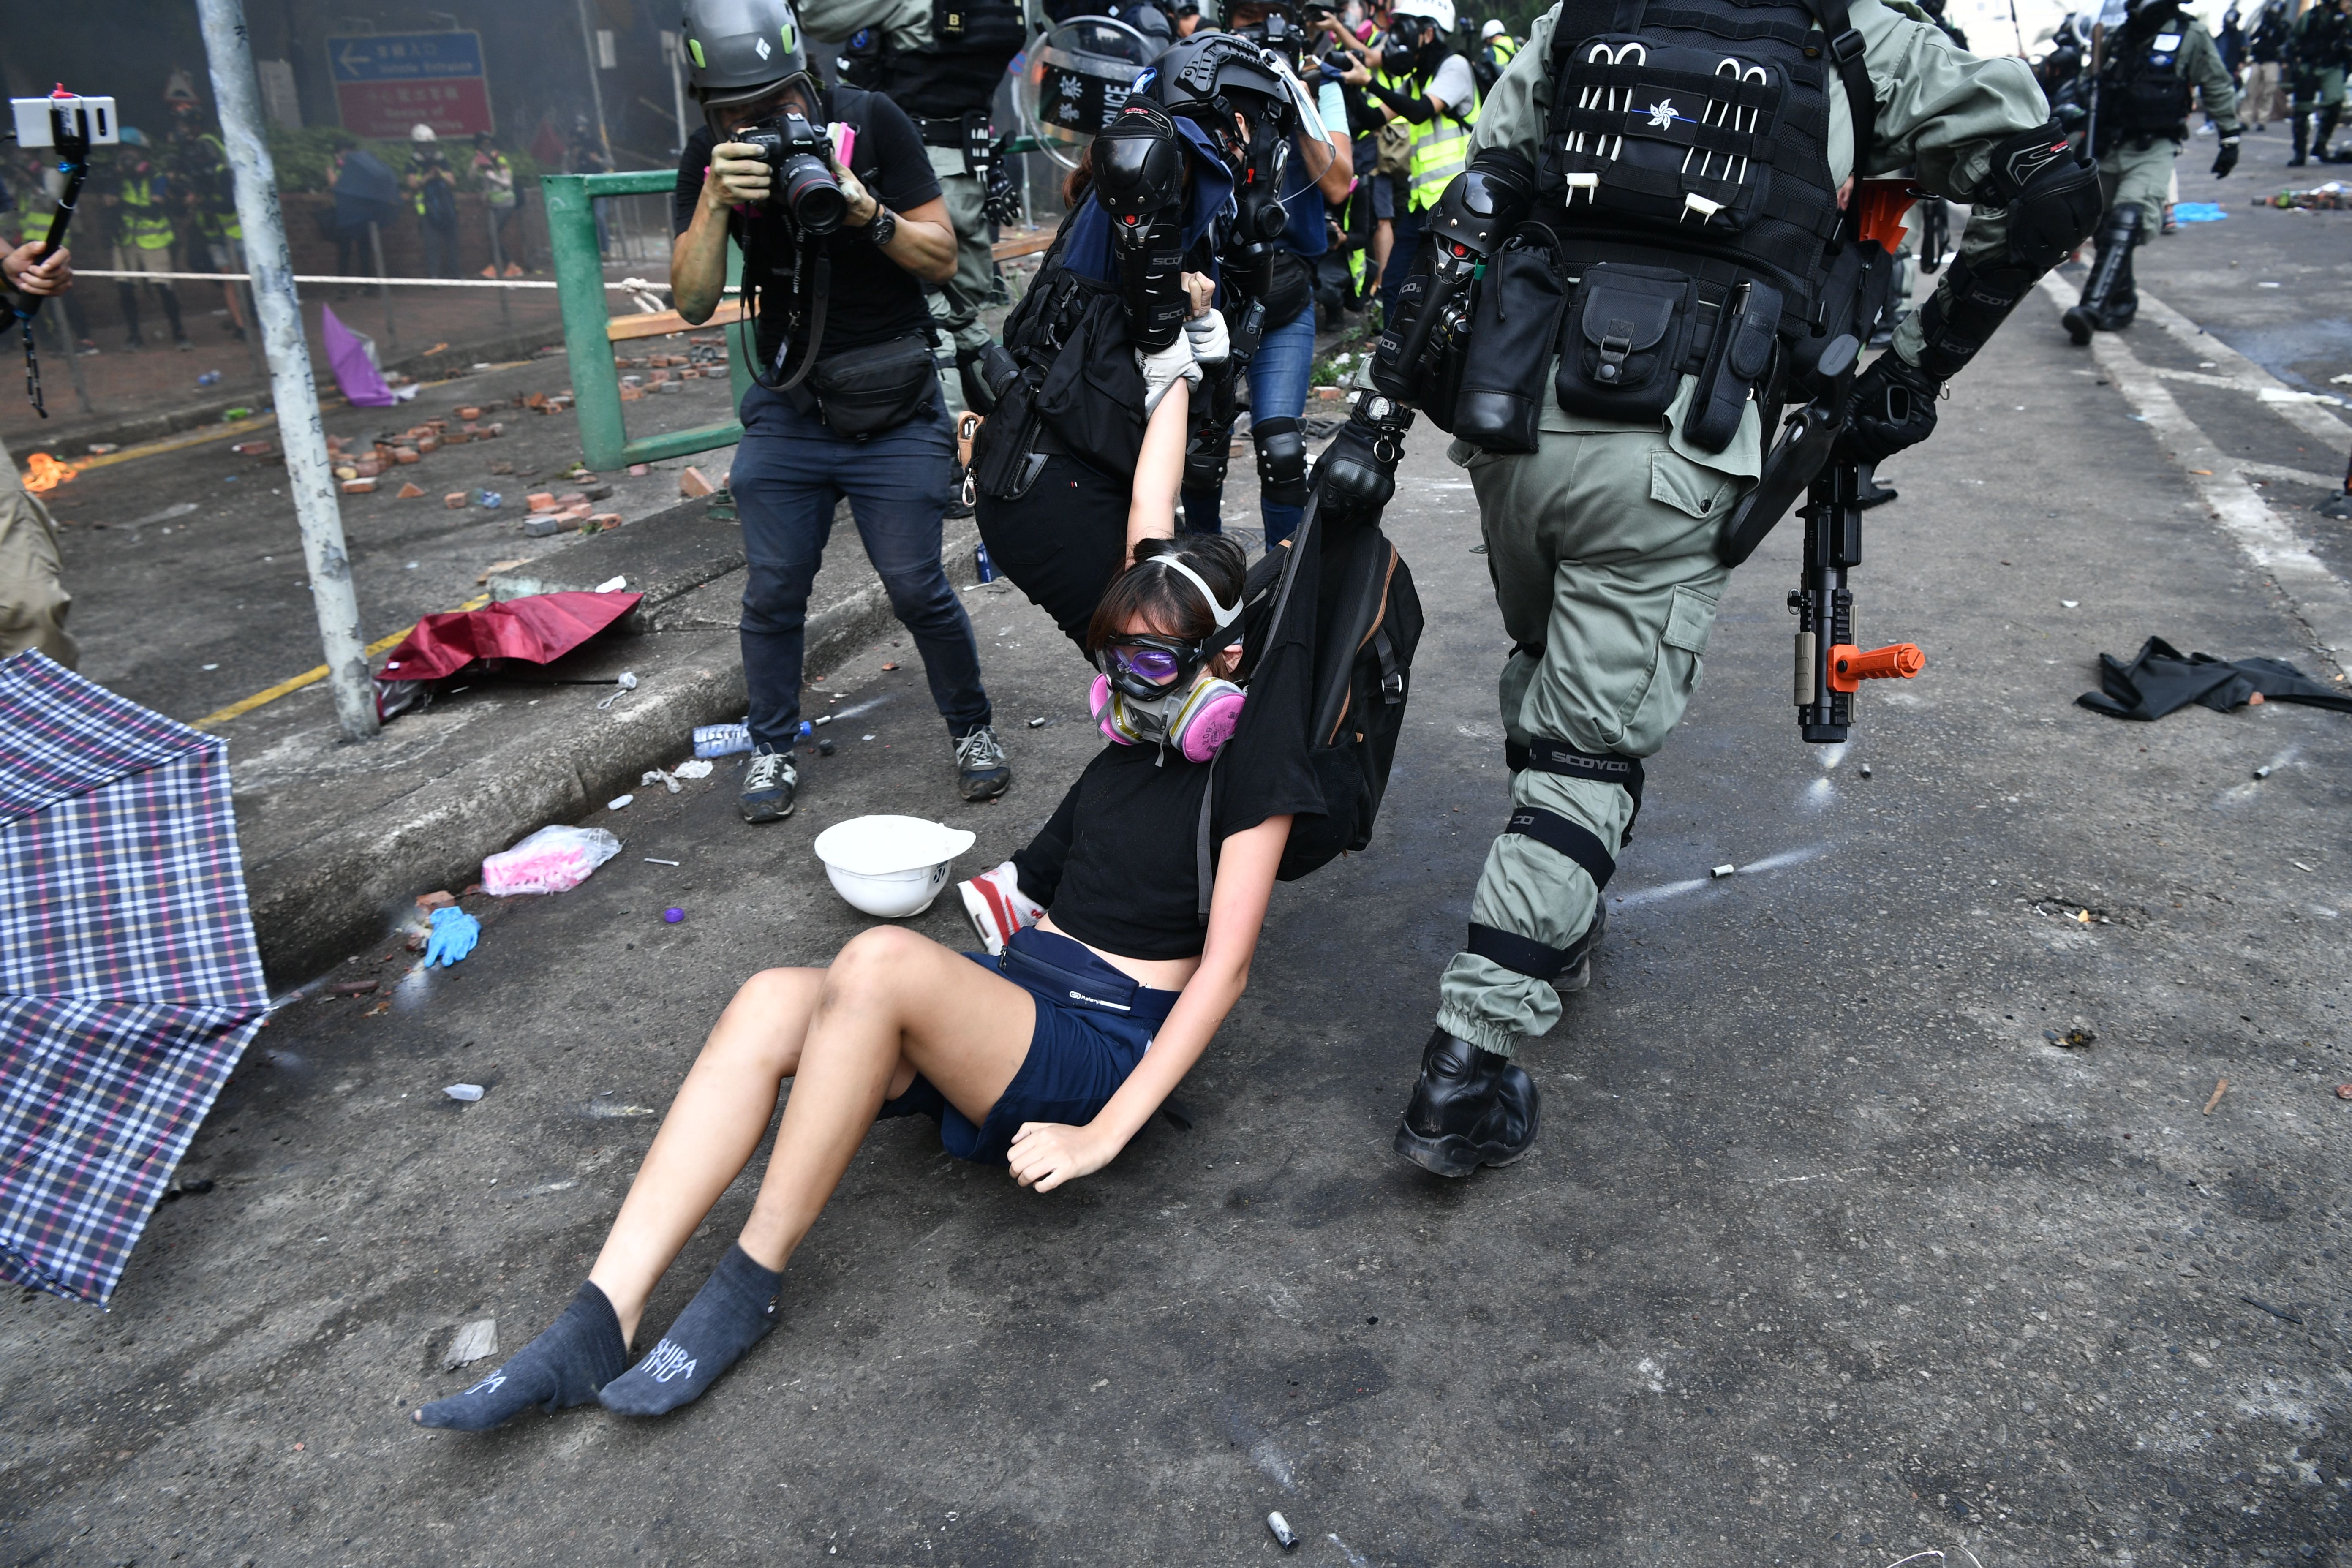 Protesters are detained by police near the Hong Kong Polytechnic University on November 18, 2019.